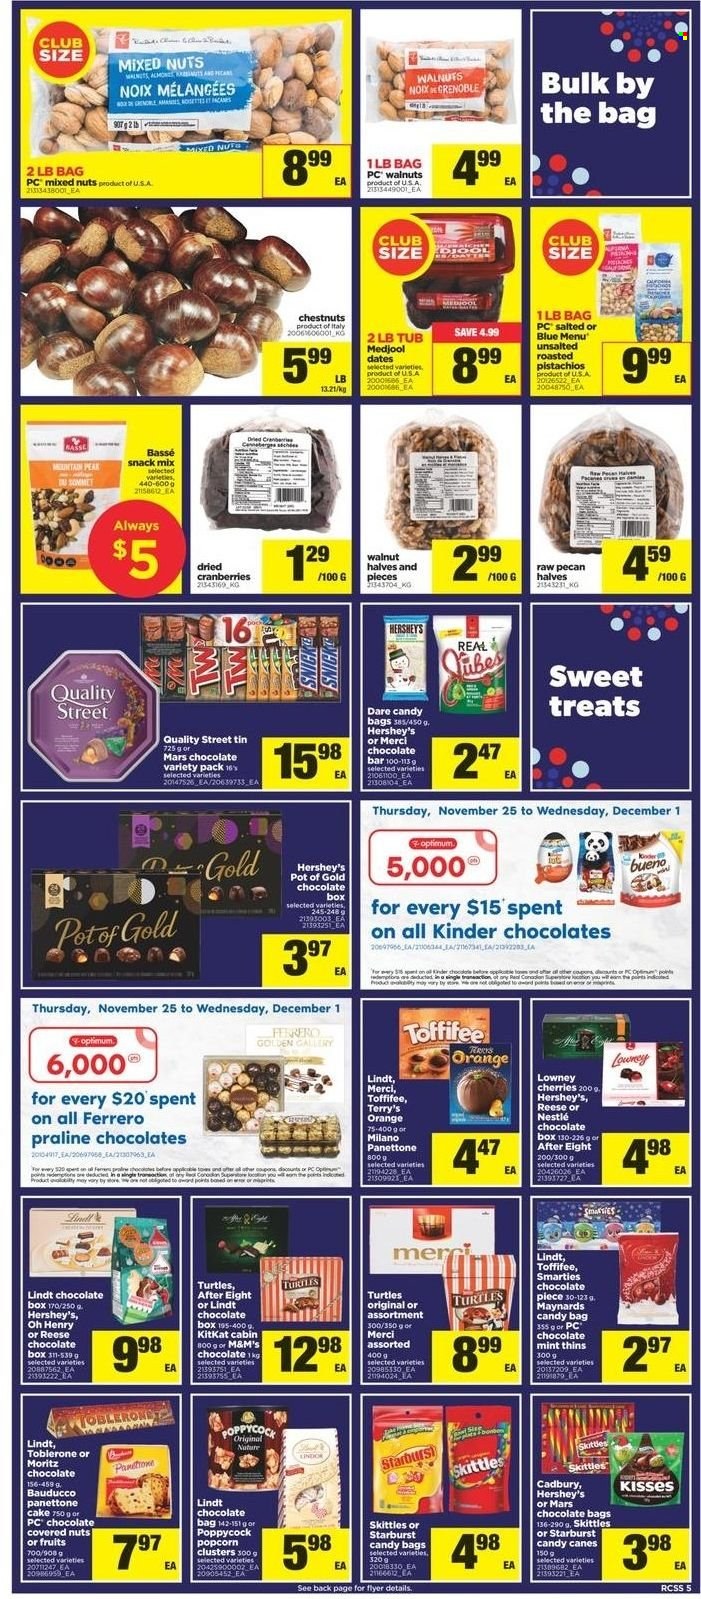 thumbnail - Real Canadian Superstore Flyer - November 25, 2021 - December 01, 2021 - Sales products - cake, panettone, cherries, Hershey's, snack, Mars, KitKat, Toblerone, After Eight, Cadbury, Merci, Skittles, Starburst, Thins, popcorn, cranberries, walnuts, chestnuts, dried fruit, pistachios, dried dates, mixed nuts, pot, pen, turtles, Optimum, WD, Nestlé, Lindt, Lindor, Ferrero Rocher, Smarties, oranges, M&M's. Page 5.